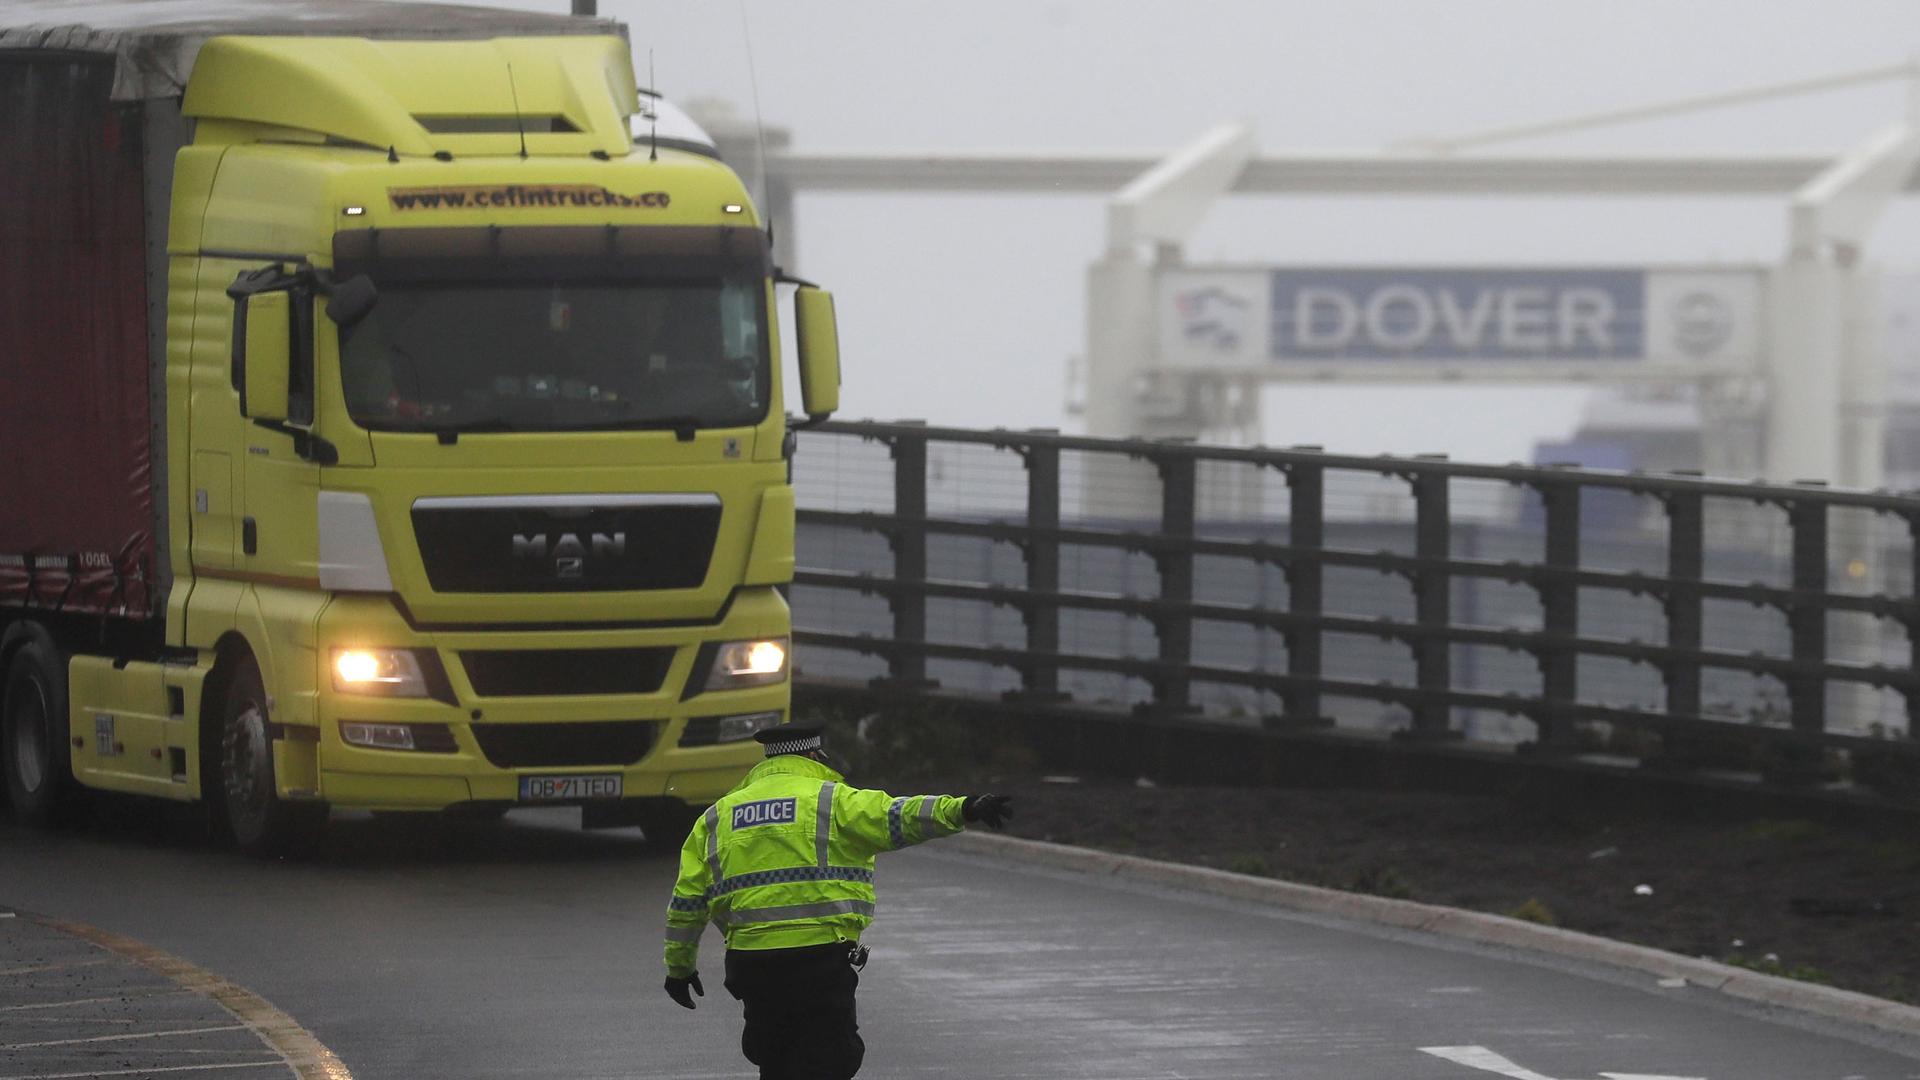 A yellow semi-truck is shown being directed by a police officer wearing a reflective jacket with a sign for Dover in the background.